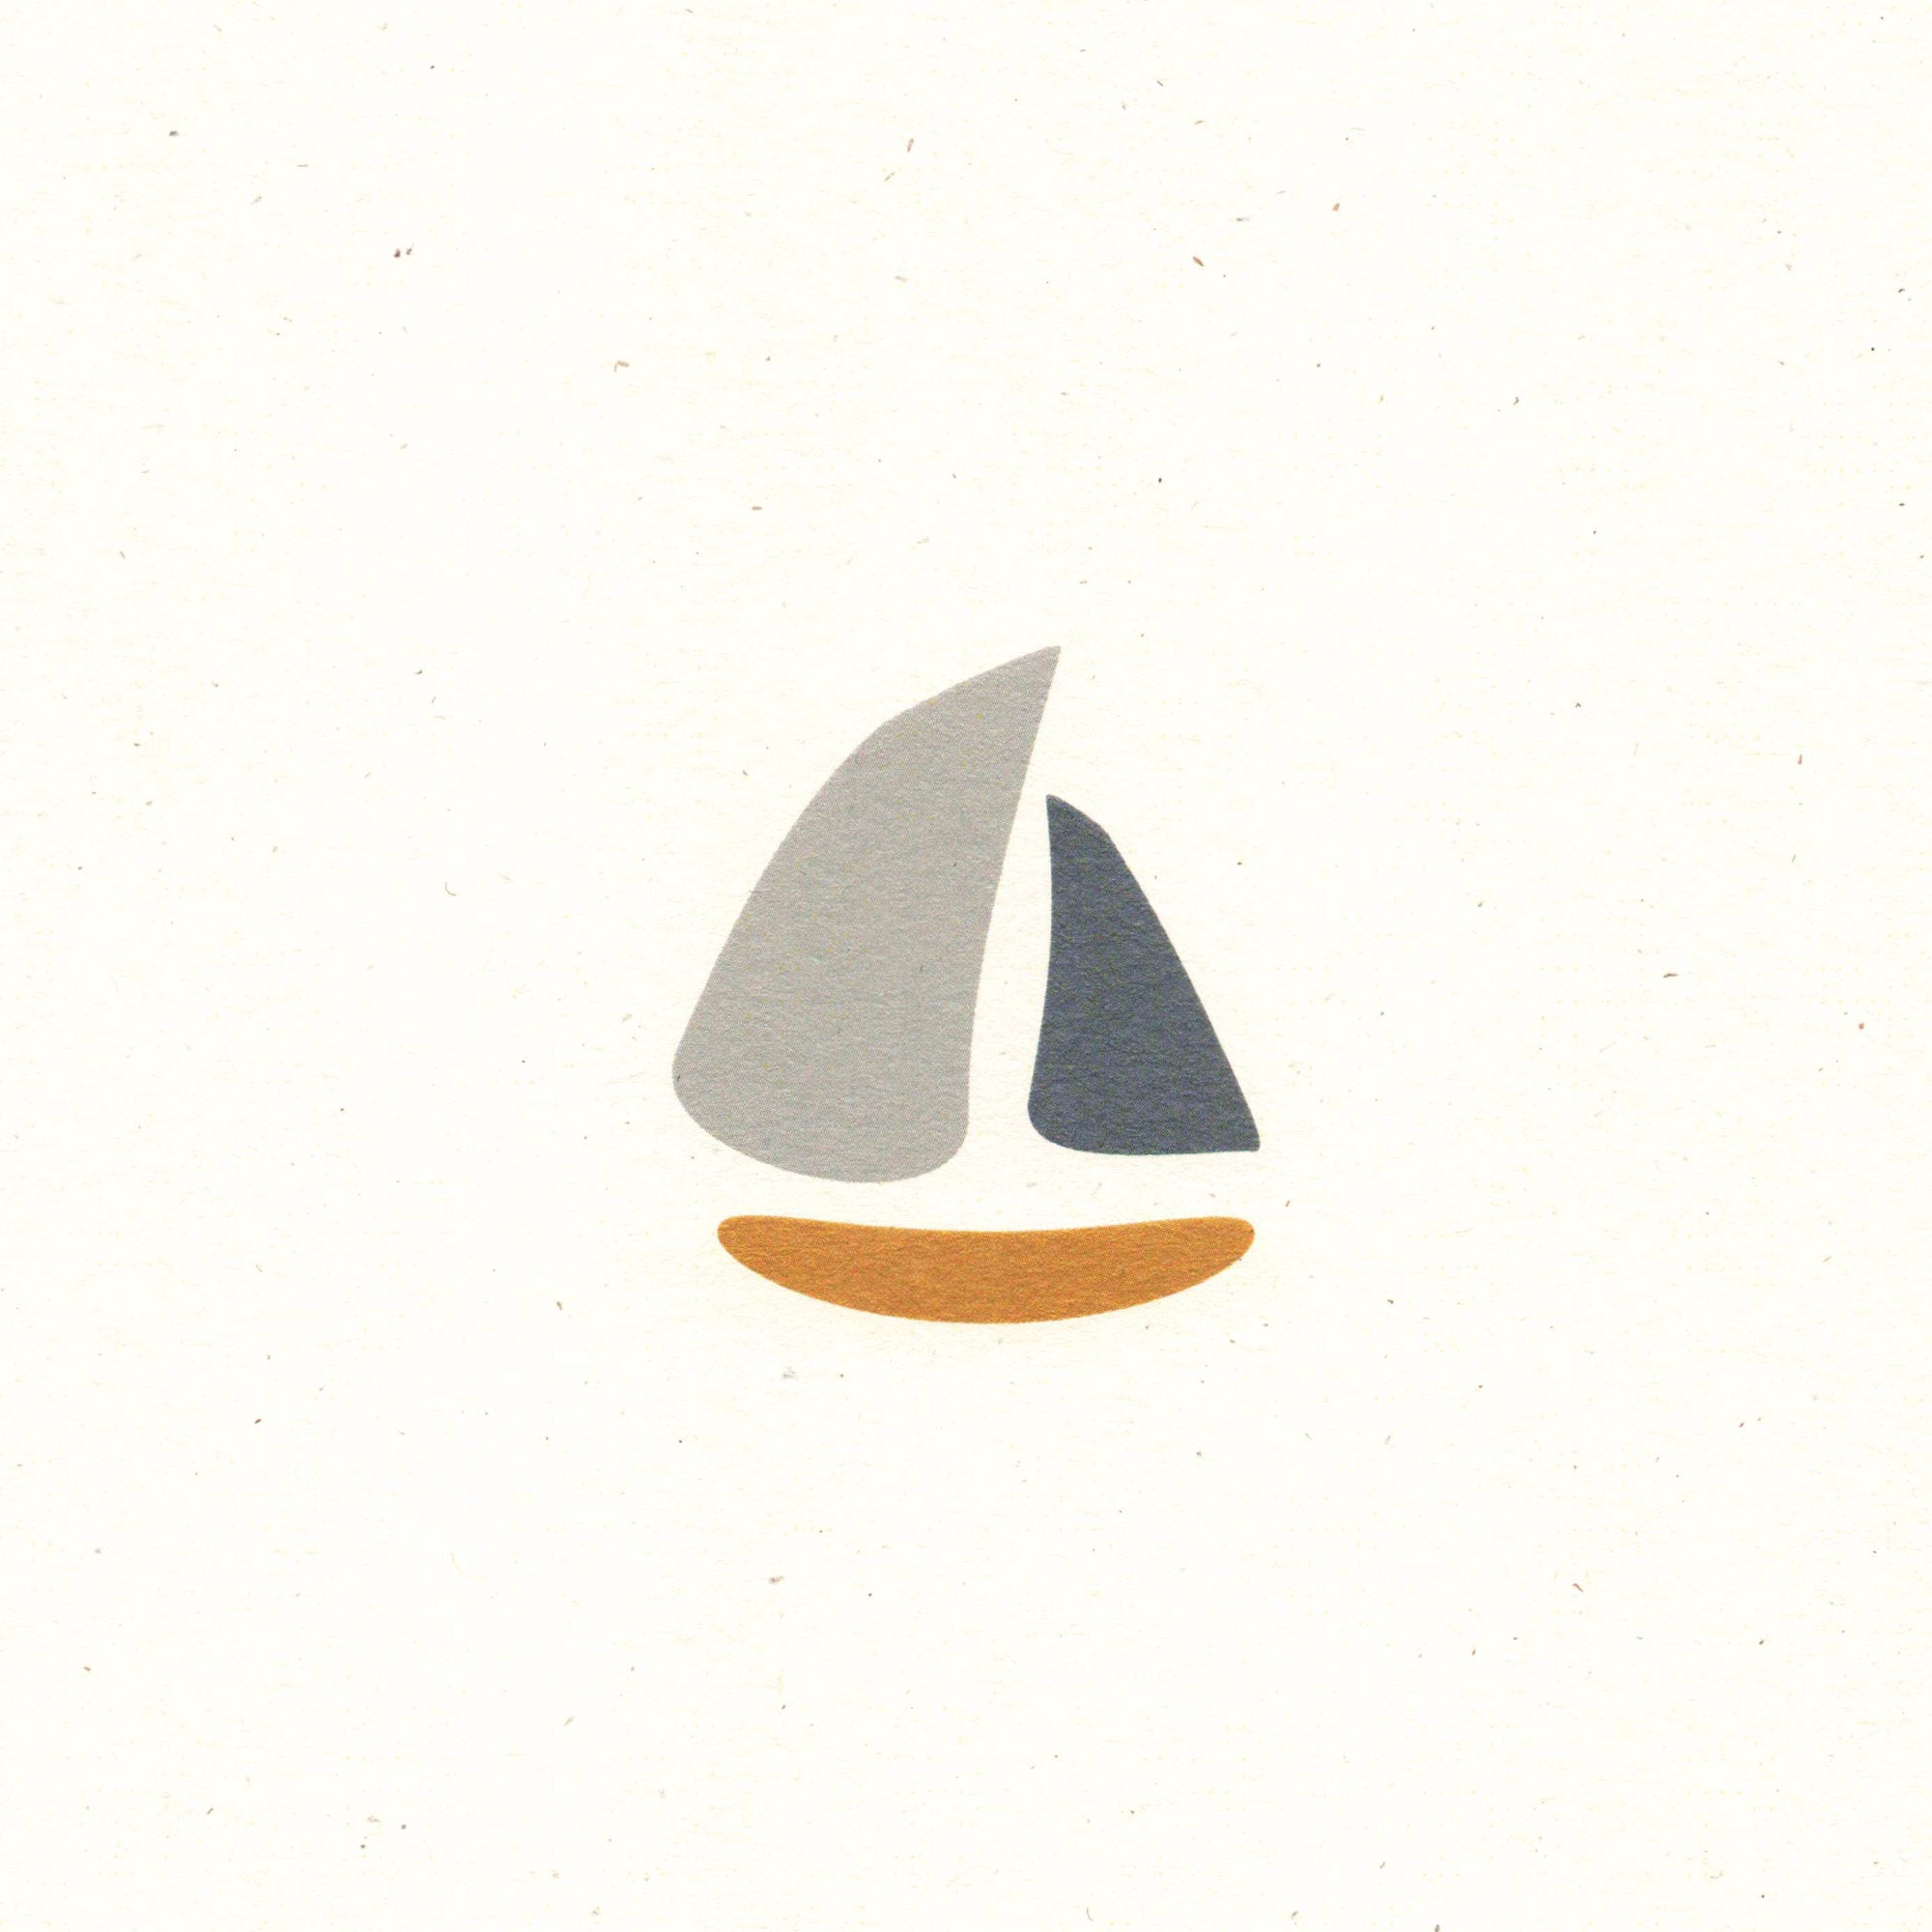 A close-up view of the schooner design, printed on recycled, natural paper, with flecks visible in the paper surface.